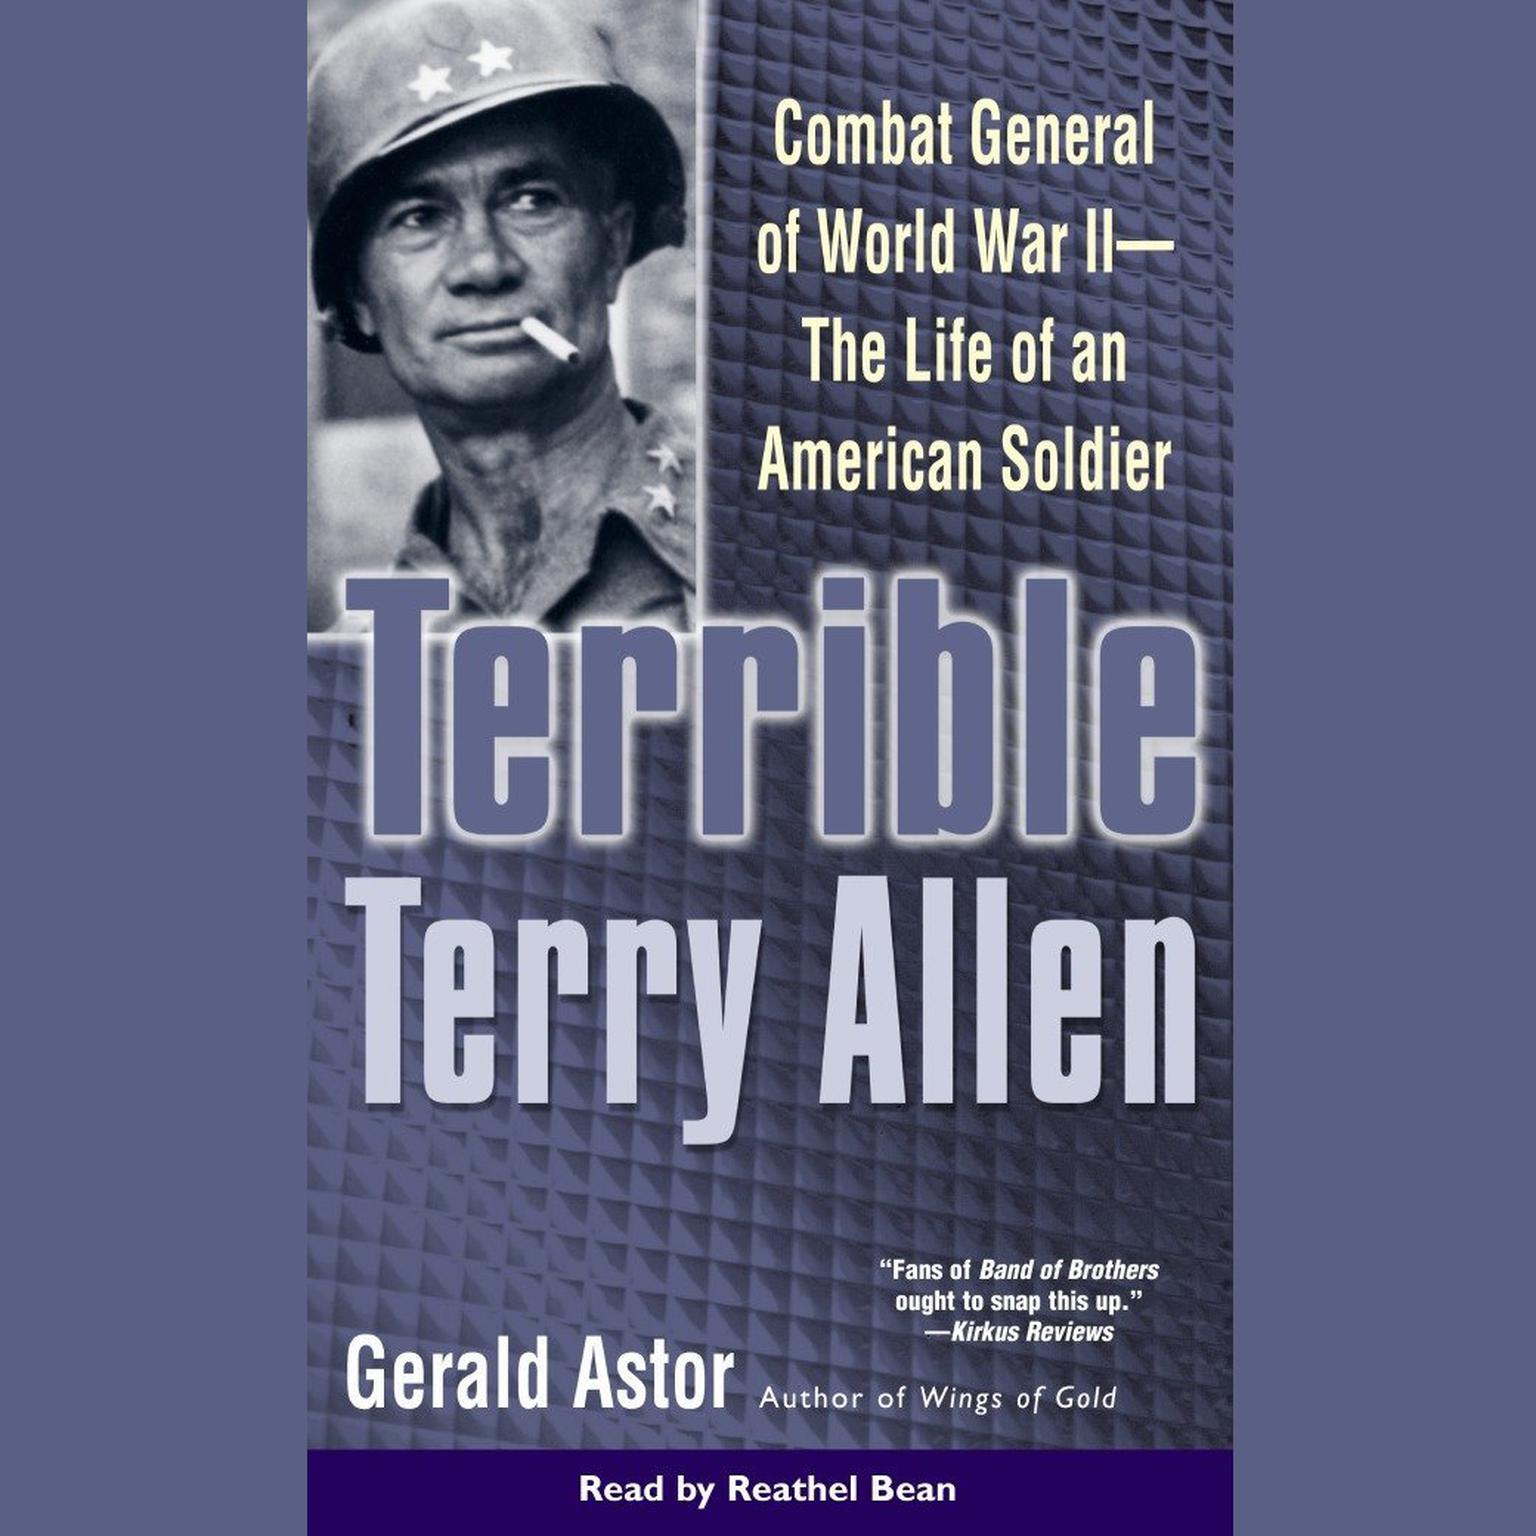 Terrible Terry Allen (Abridged): Combat General of WWII - The Life of an American Soldier Audiobook, by Gerald Astor